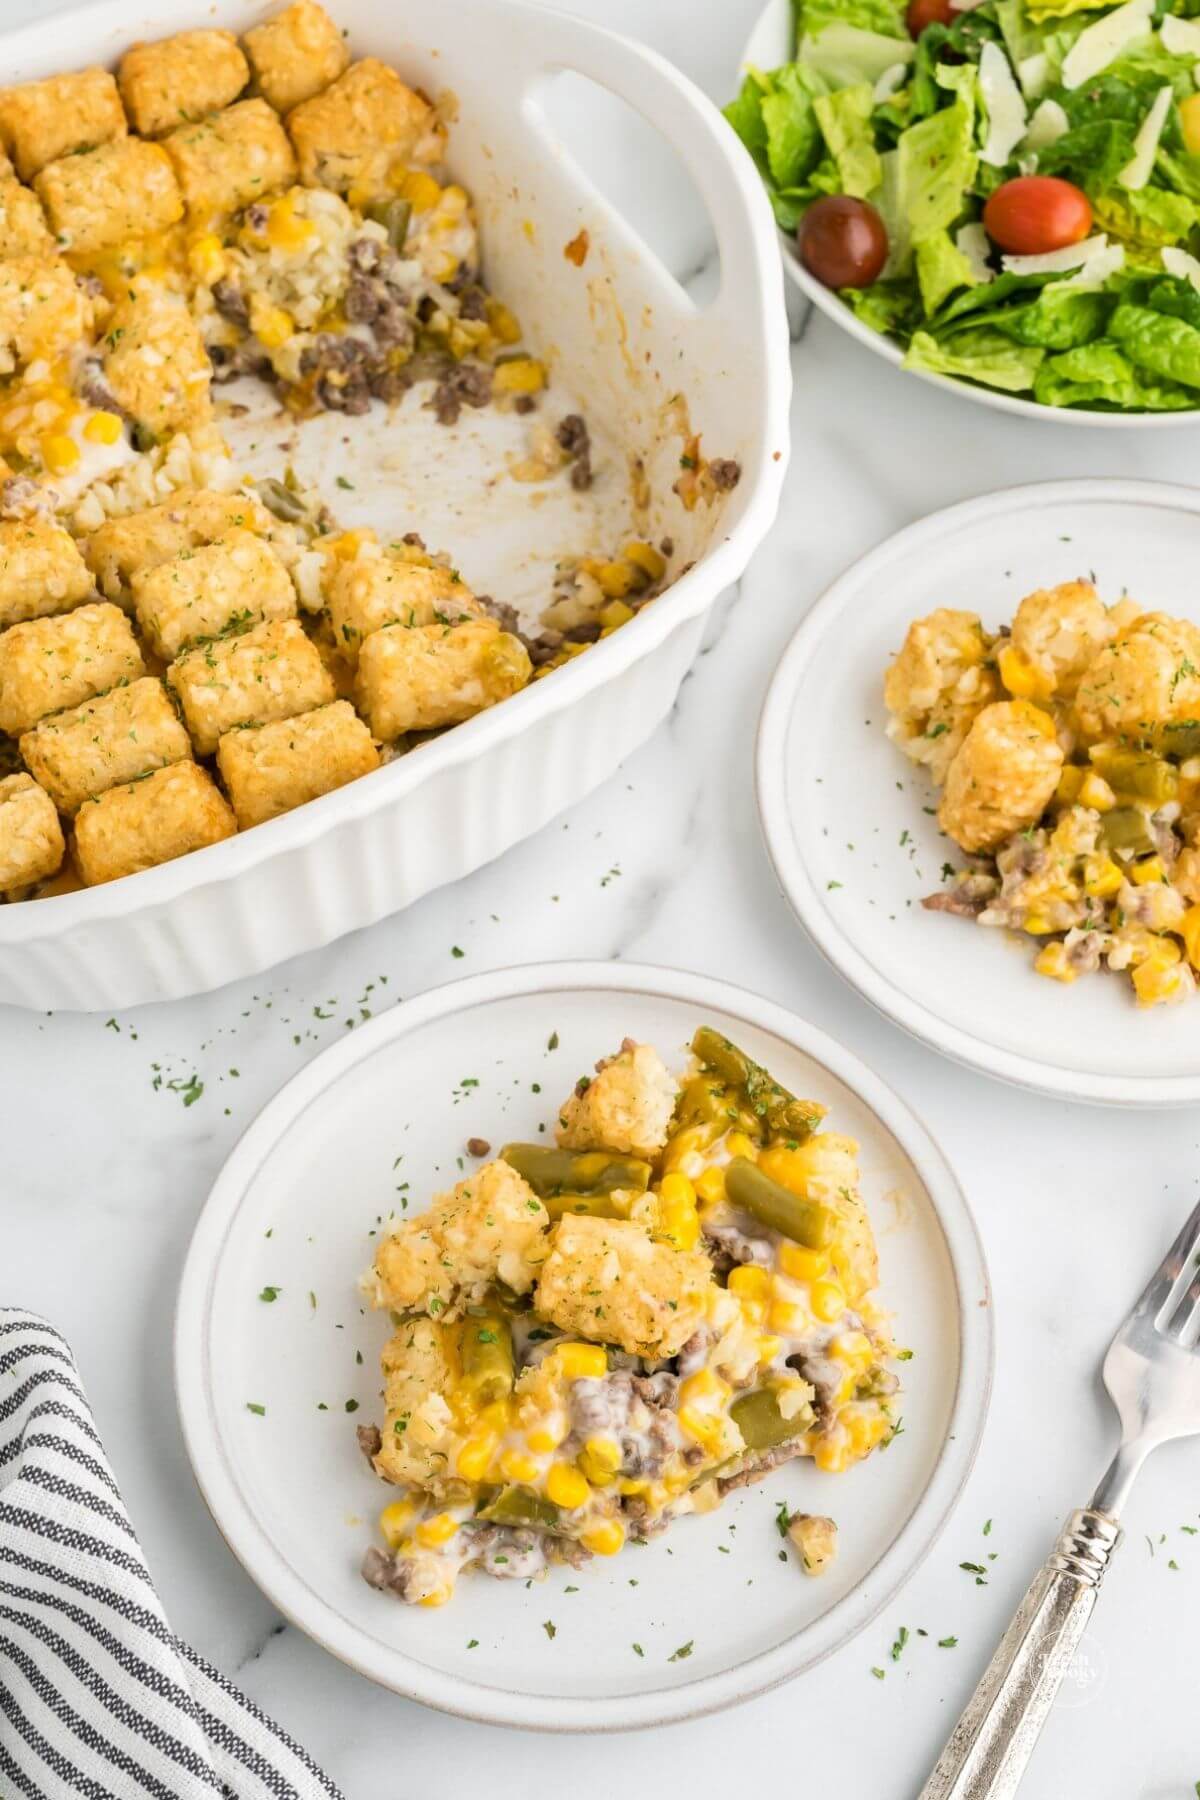 Two servings of cheesy hamburger tater tot casserole recipe on plate with casserole dish behind.